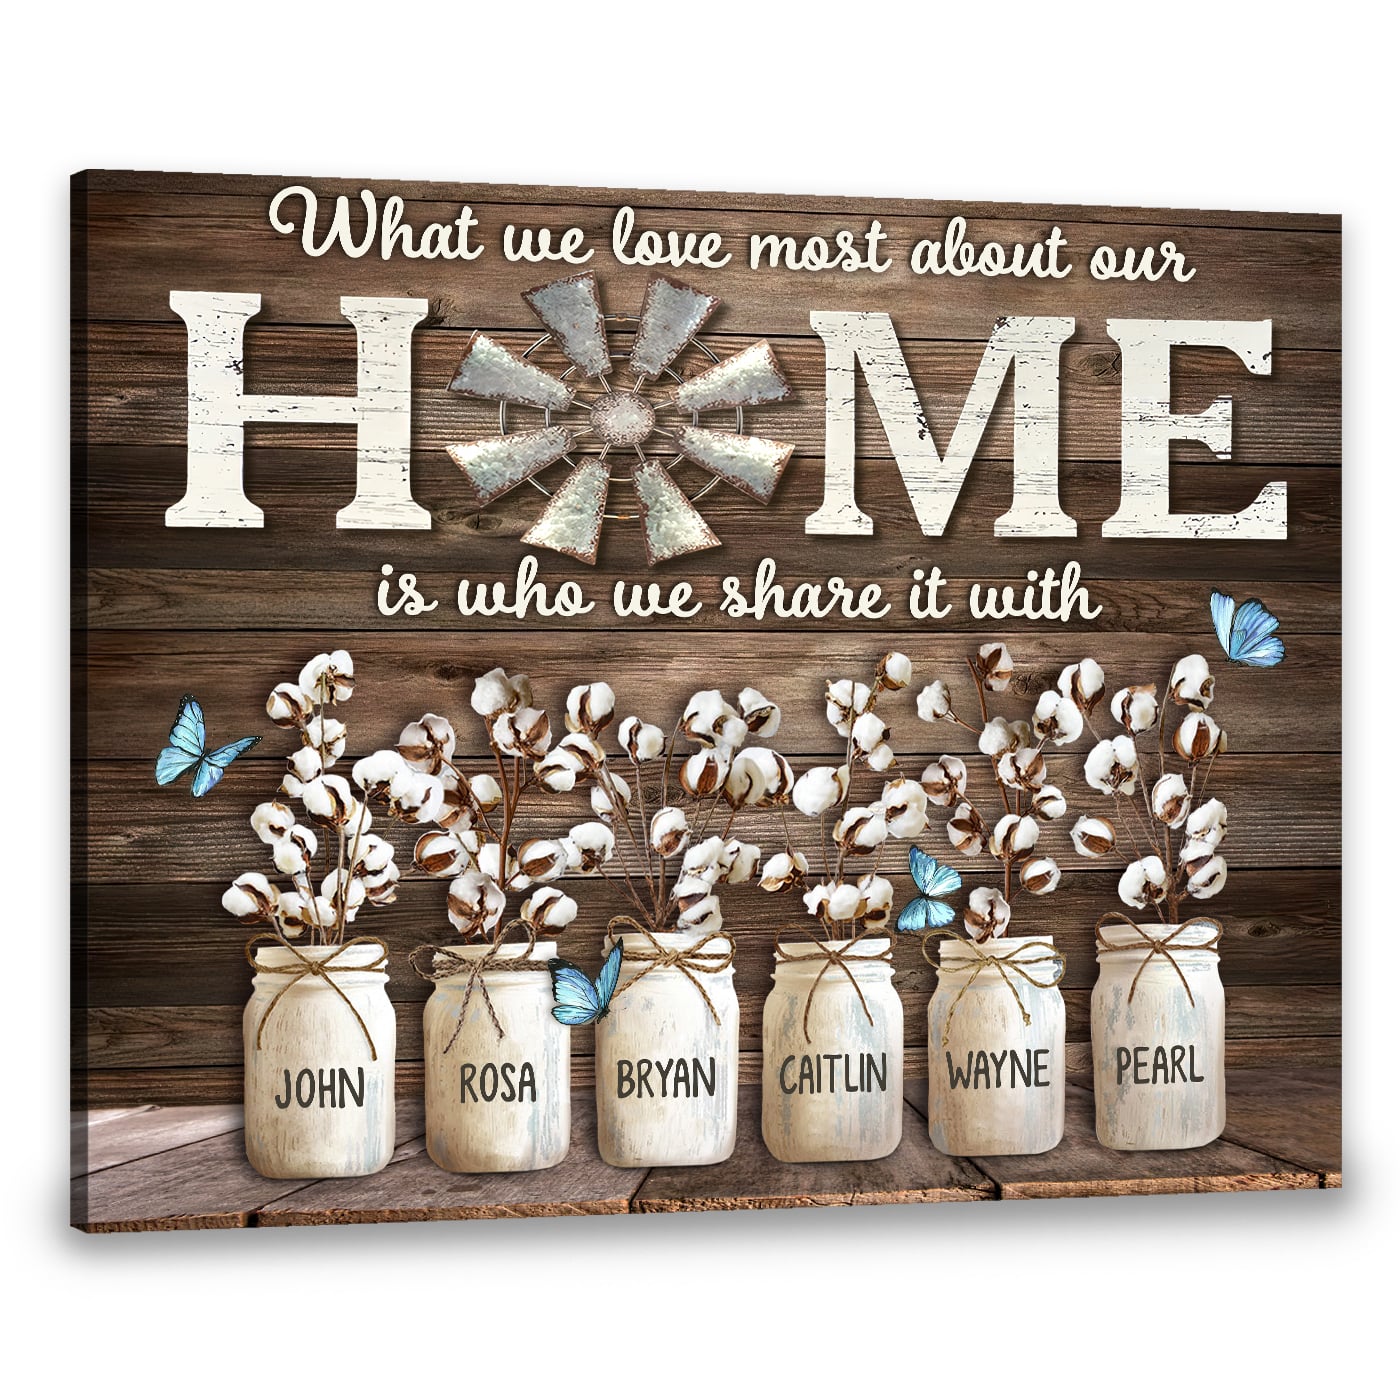 Custom Canvas Prints Personalized Names Gifts What We Love Most About Our Home